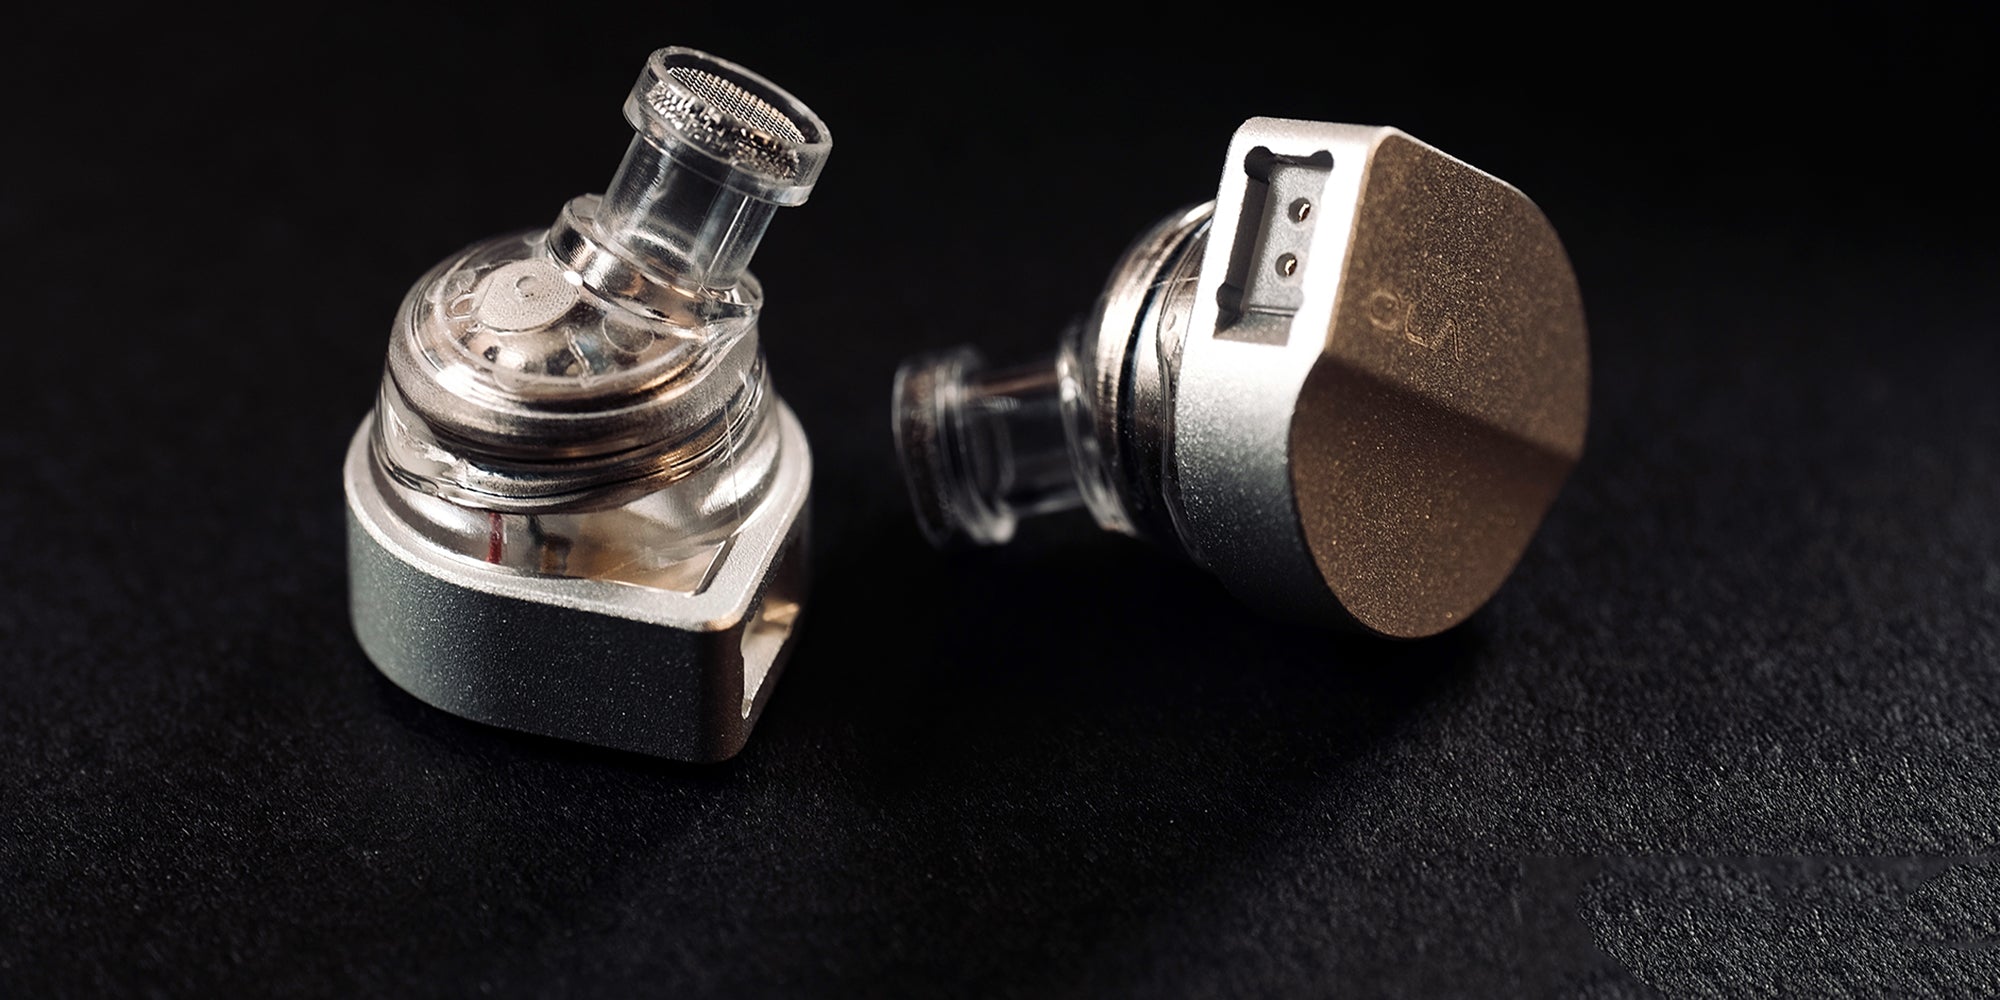 TANCHJIM OLA DMT Dynamic Driver IEMs Now Available